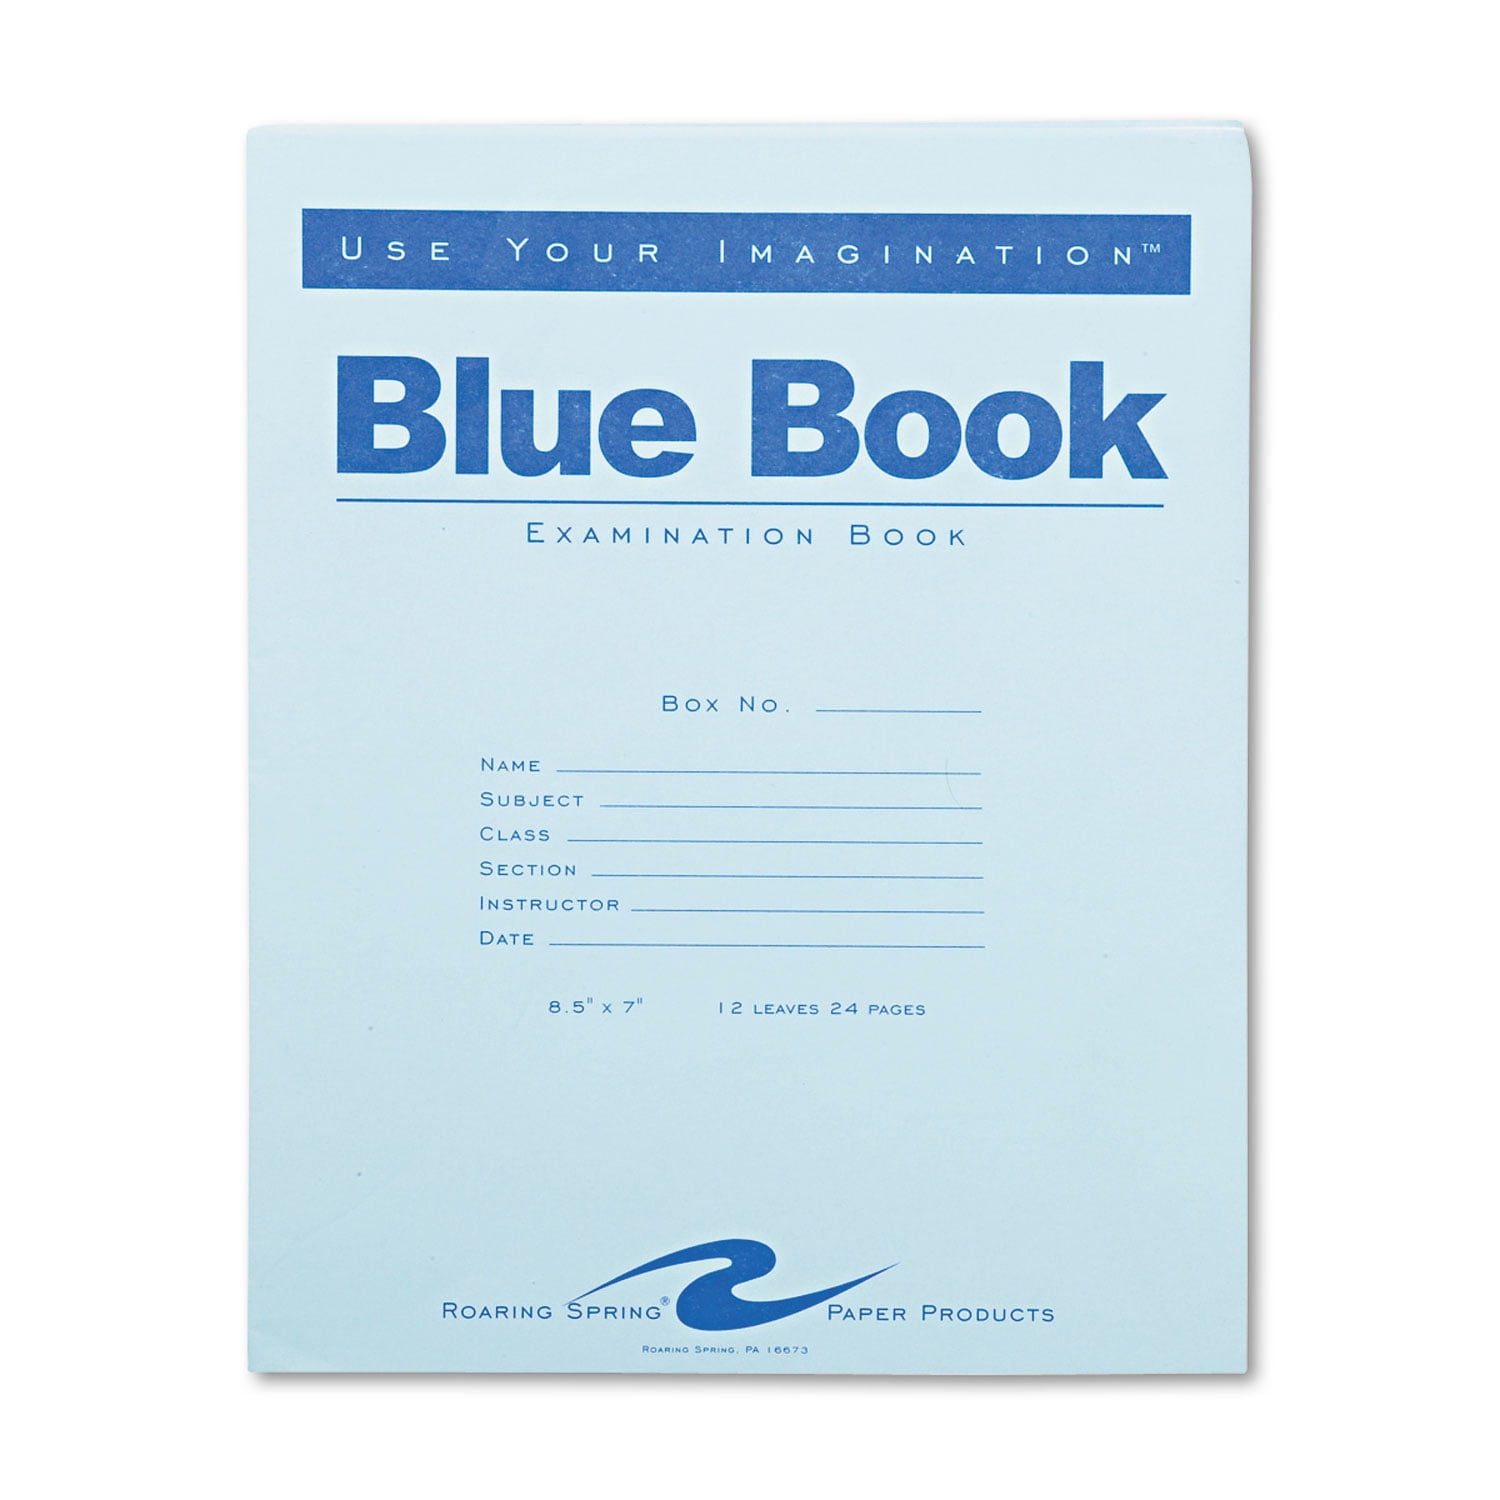 Wide Ruled with Margin 11 x 8.5 4 Sheets/8 Pages Roaring Spring Test Blue Exam Book Blue Cover 100 Pack 